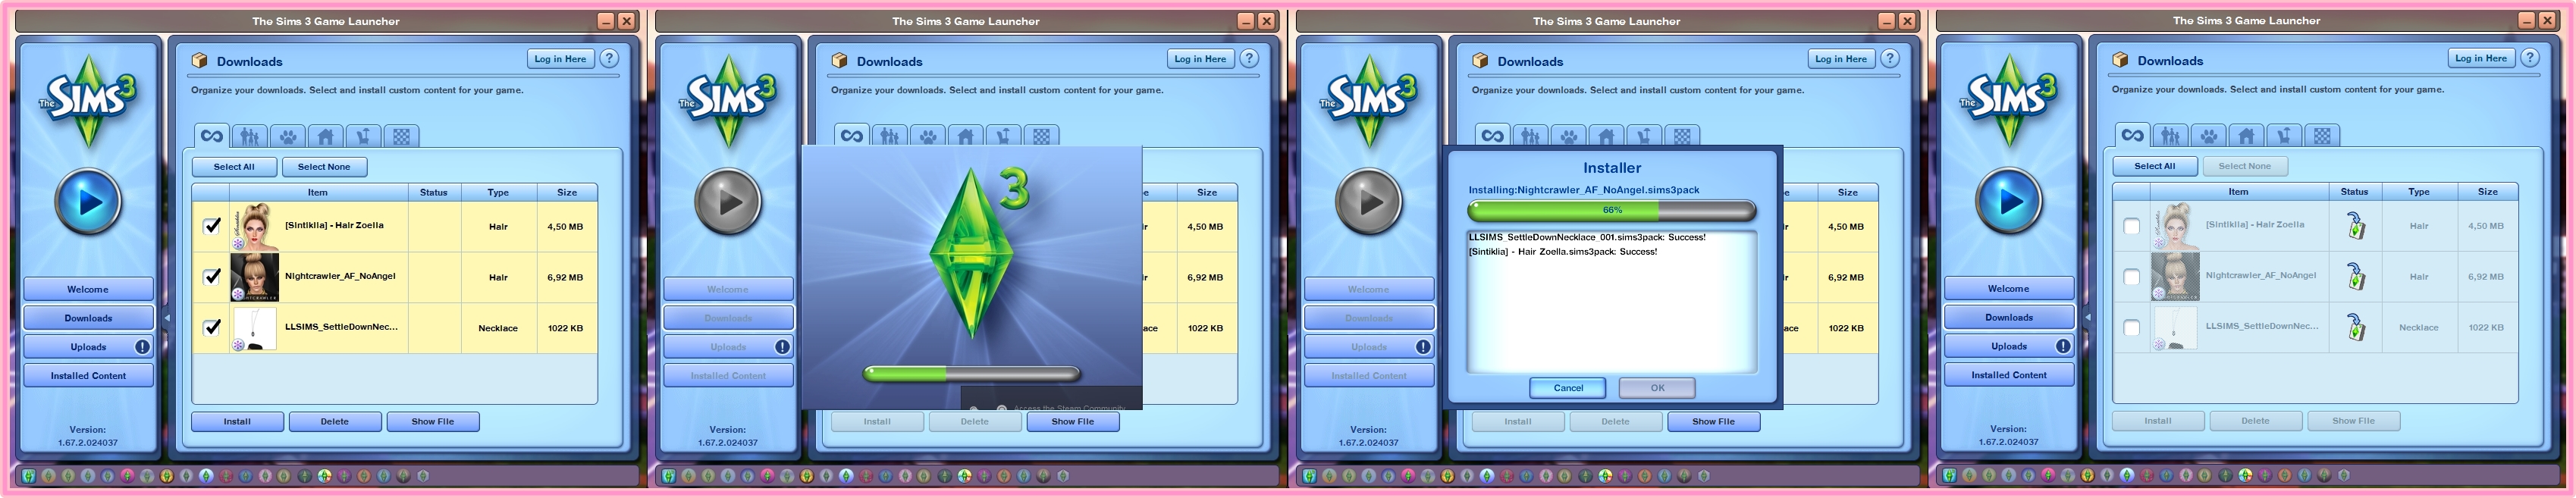 how to download sims 3 cc with winrar